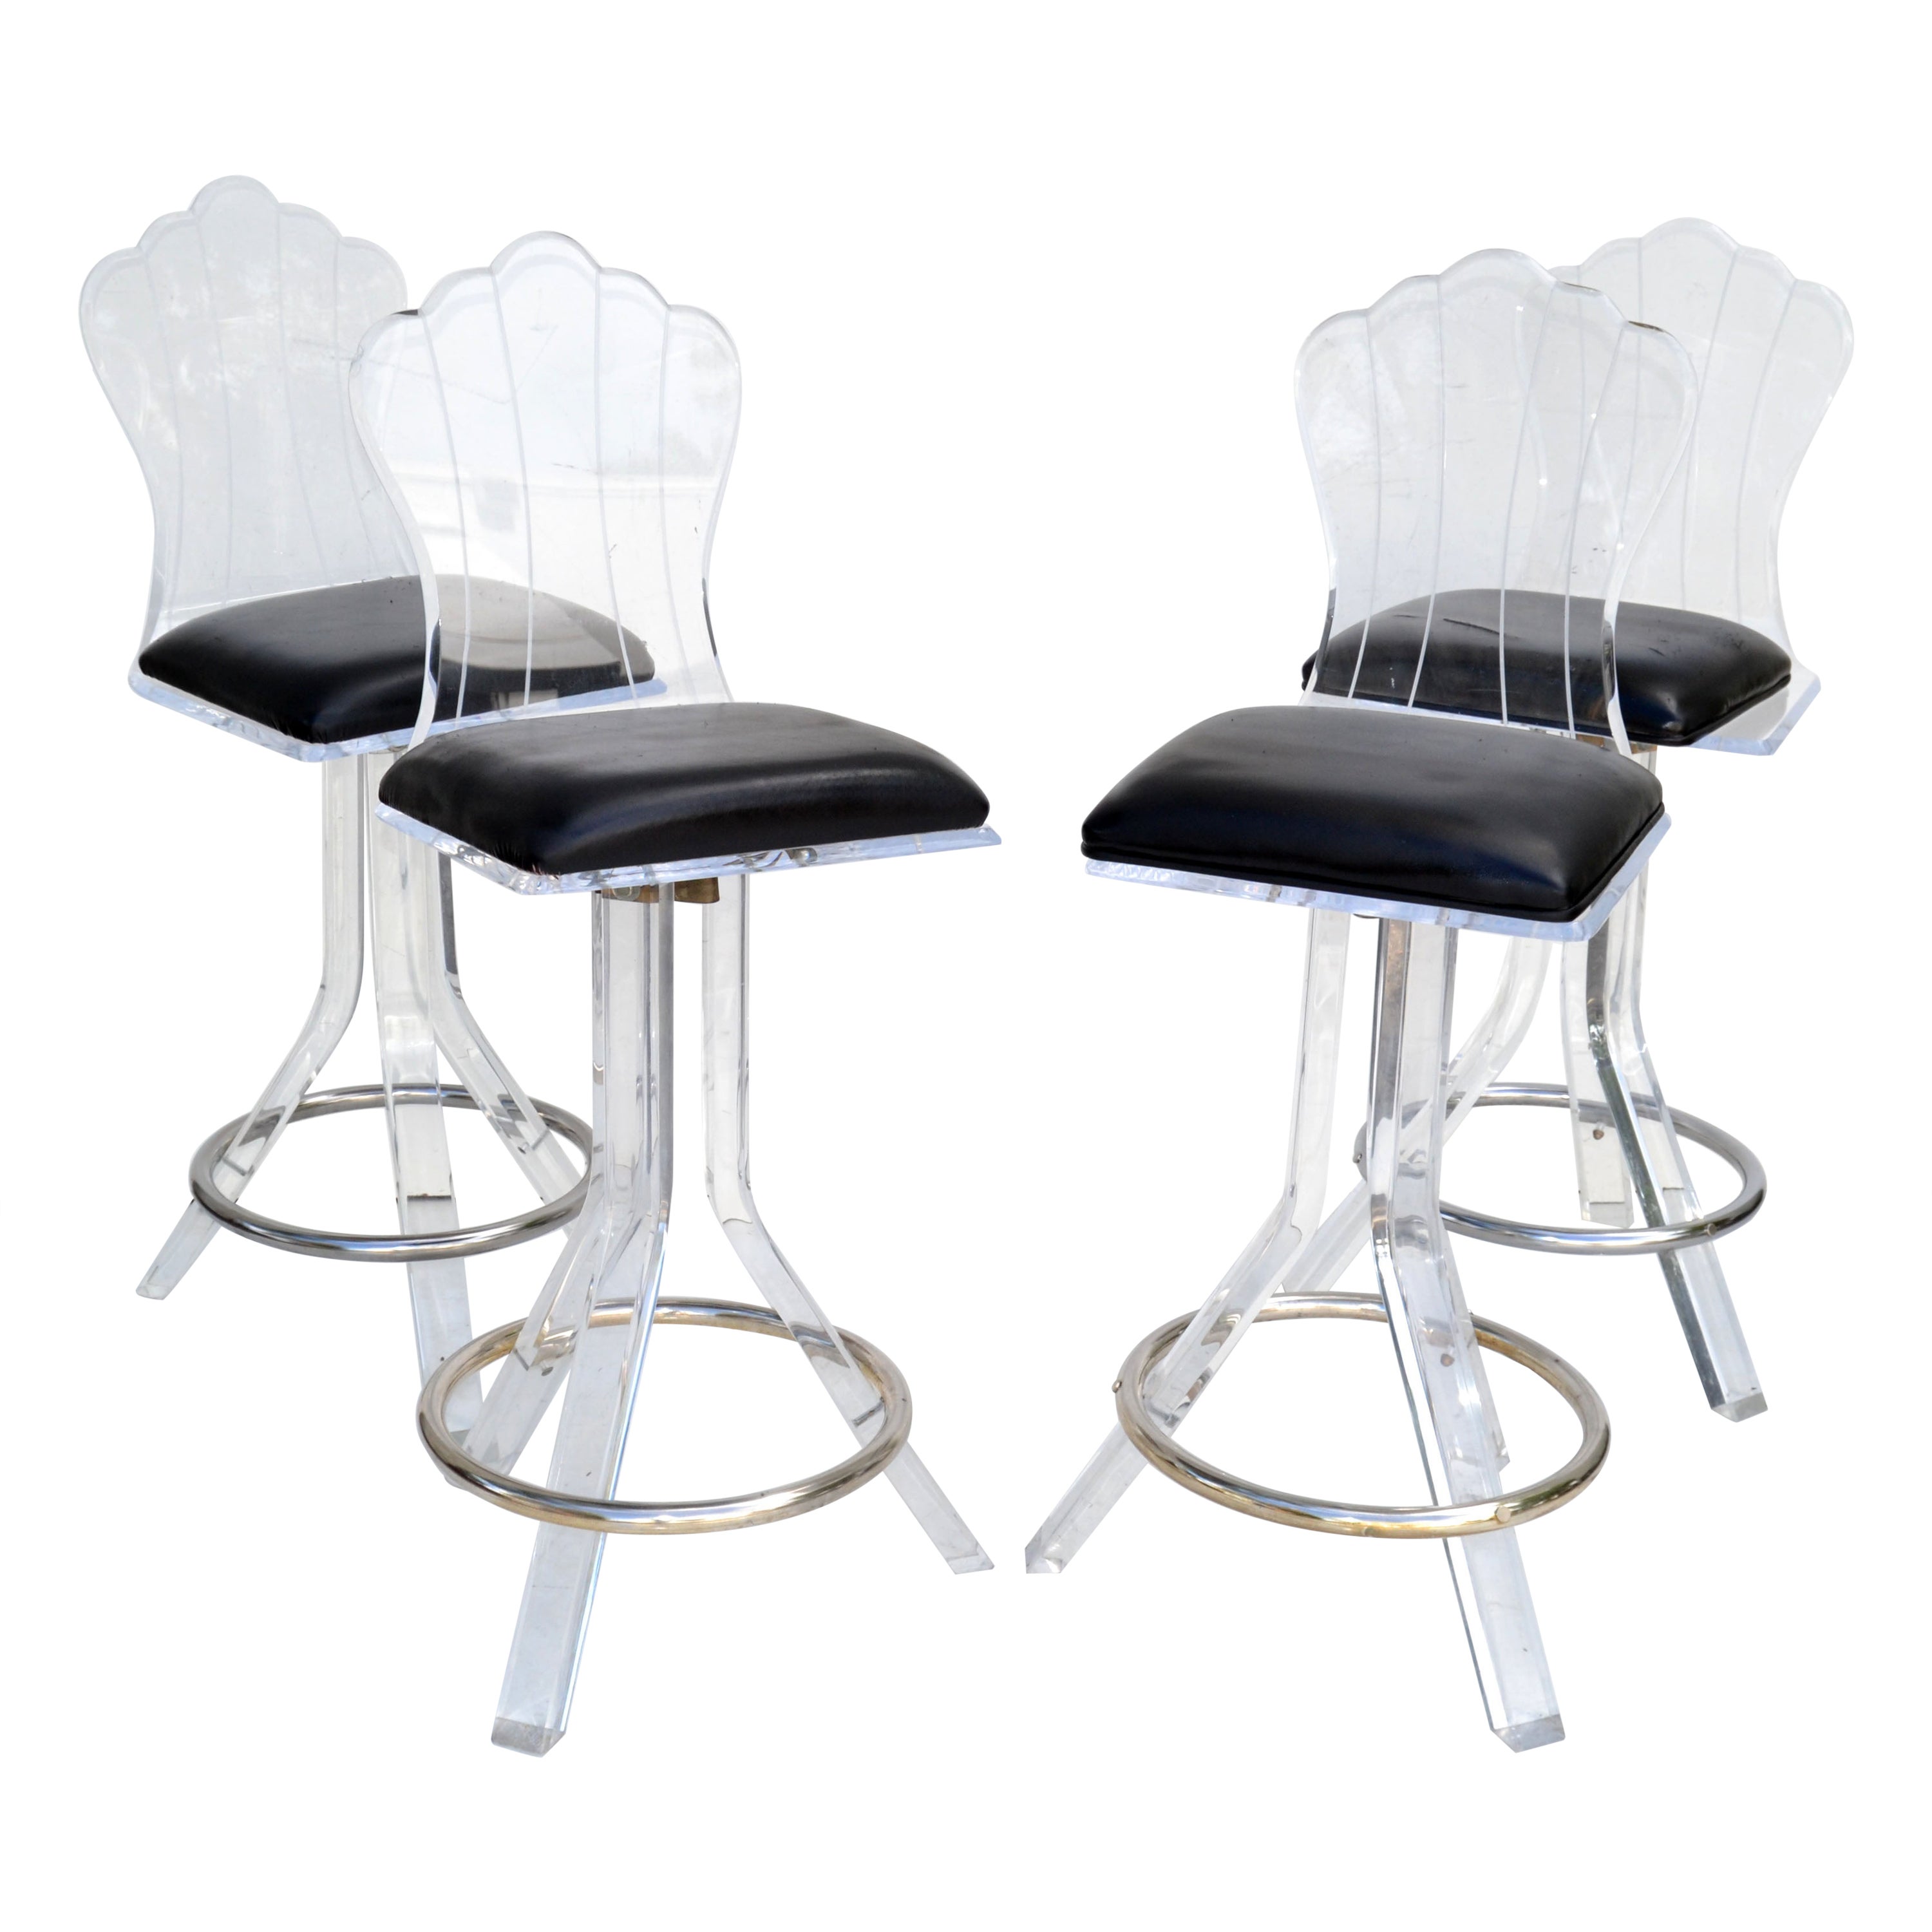 Set of 4 Hill Manufacturers Lucite & Chrome Swivel Bar Stools Mid-Century Modern